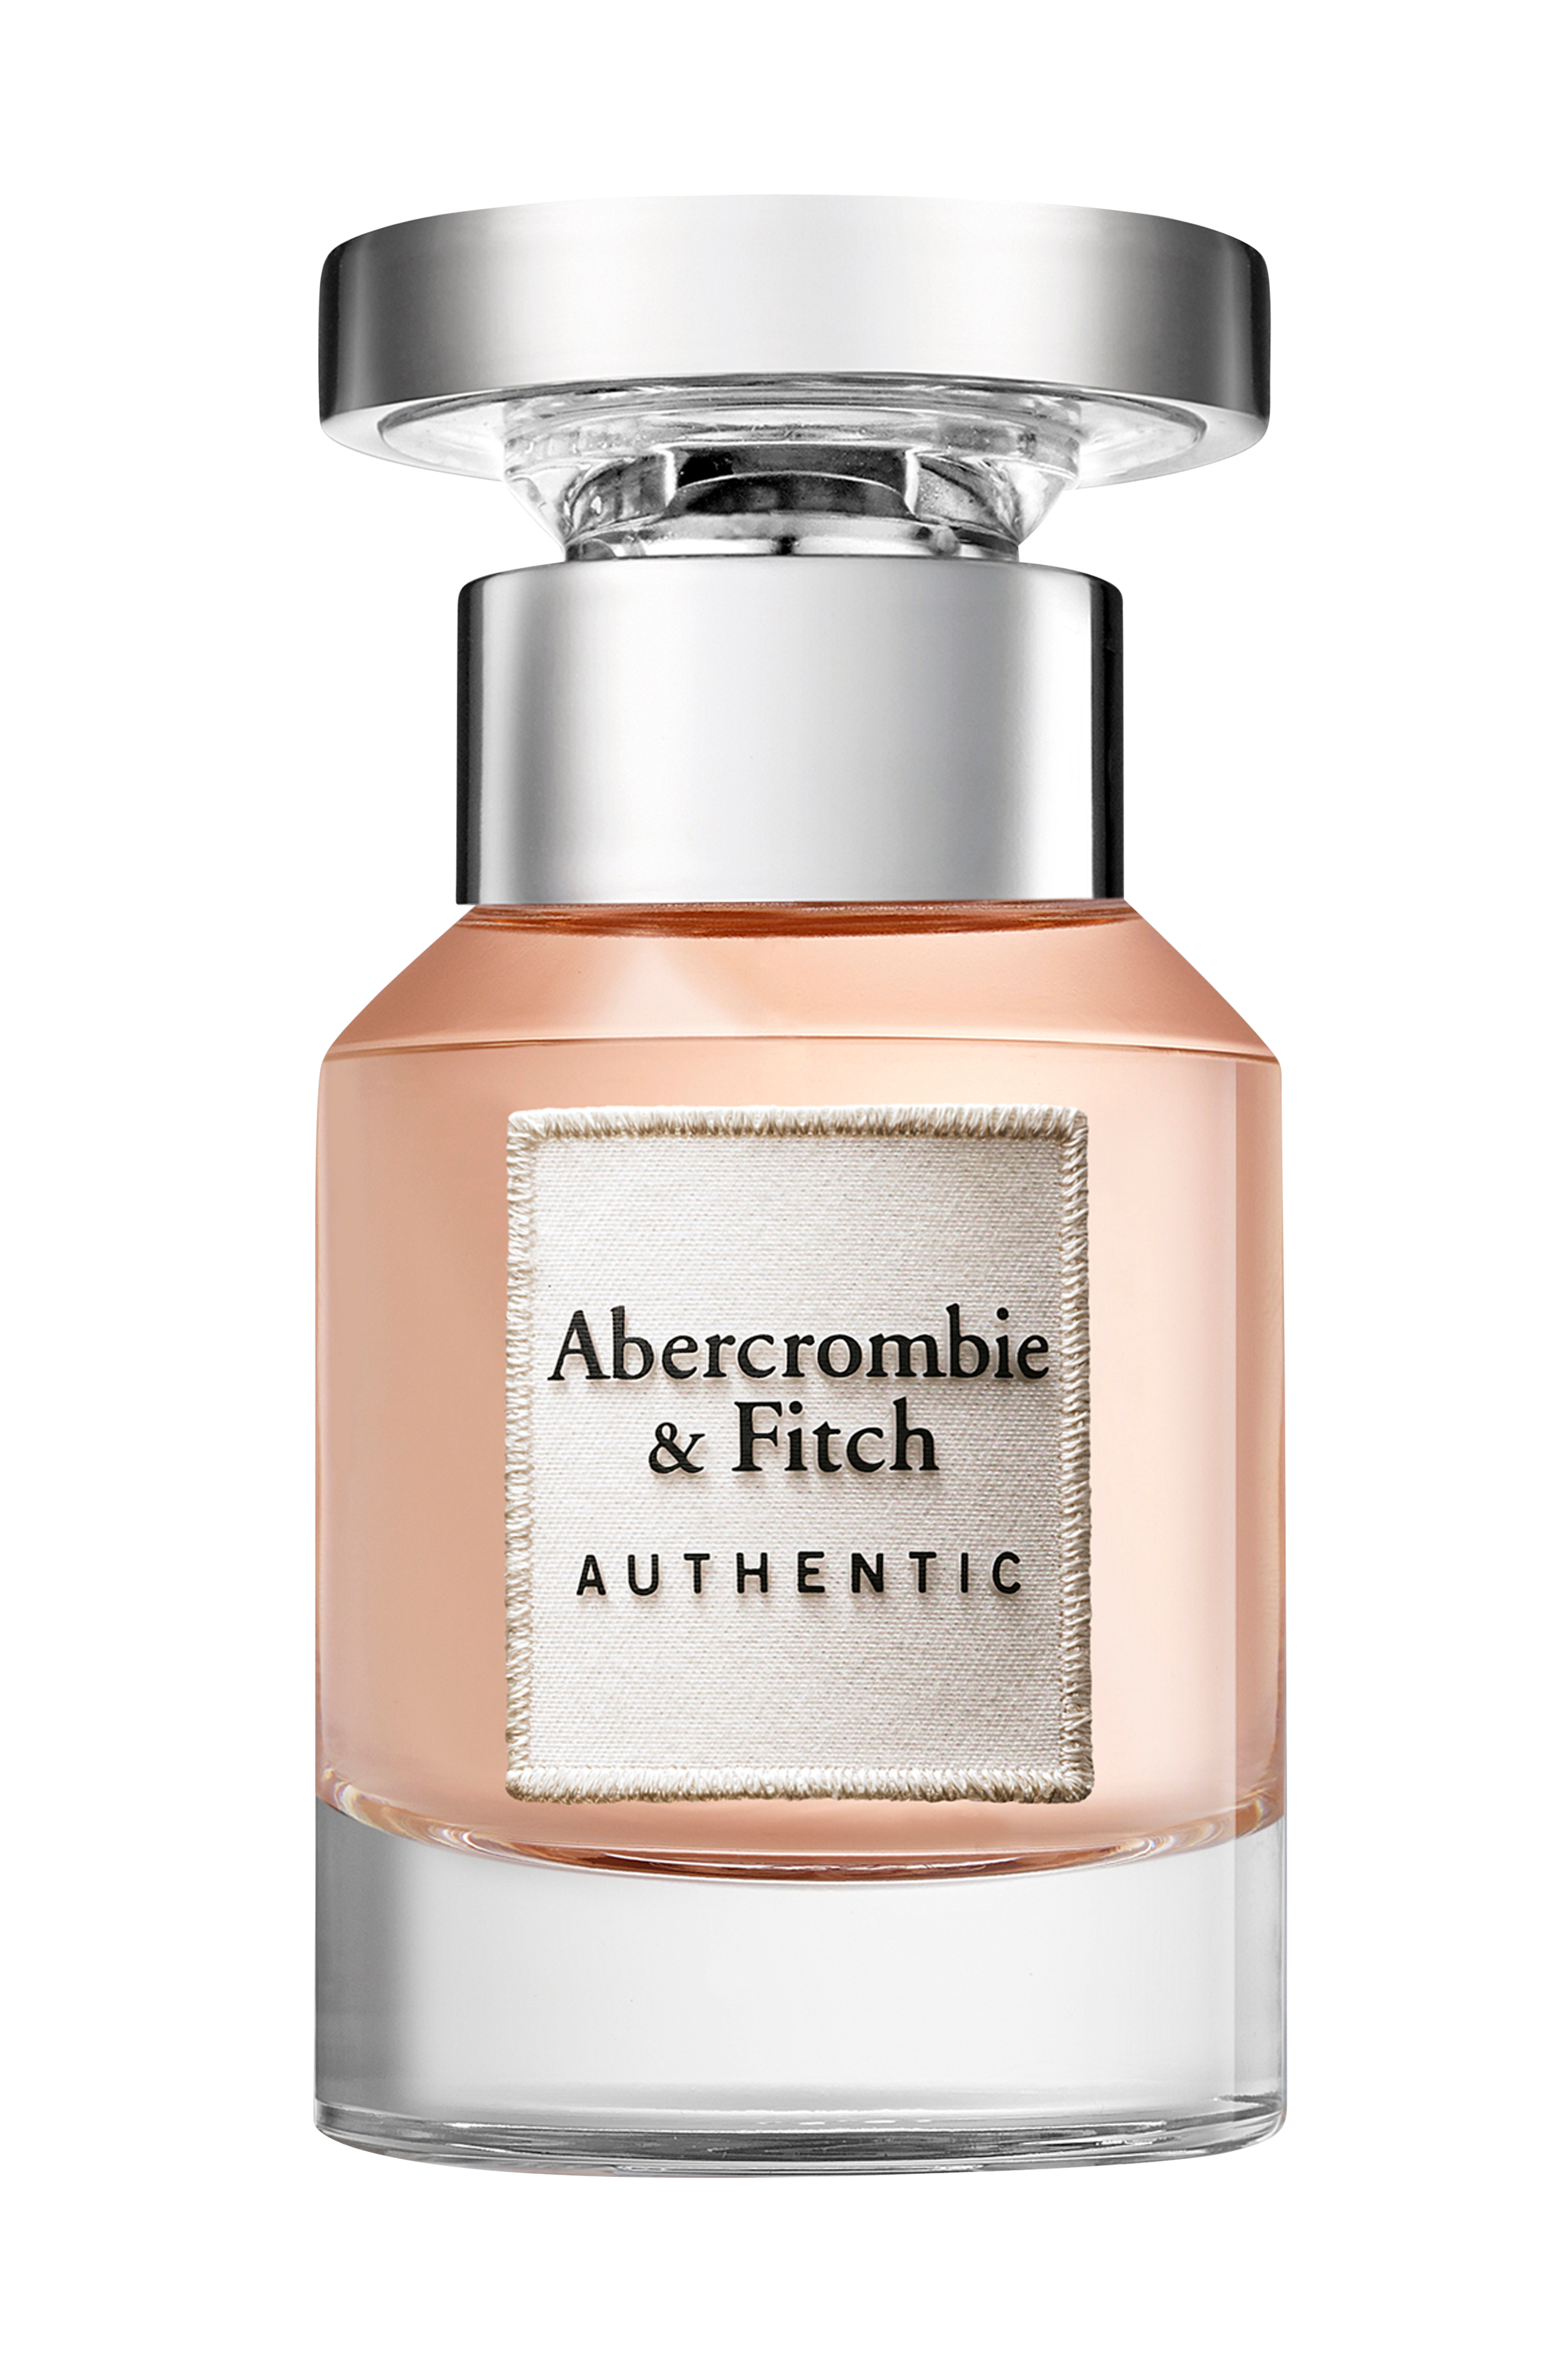 Abercrombie fitch authentic women парфюмерная вода. Духи authentic Abercrombie. Туалетная вода Abercrombie Fitch authentic. Abercrombie Fitch authentic 30. Abercrombie Fitch authentic women 30ml.